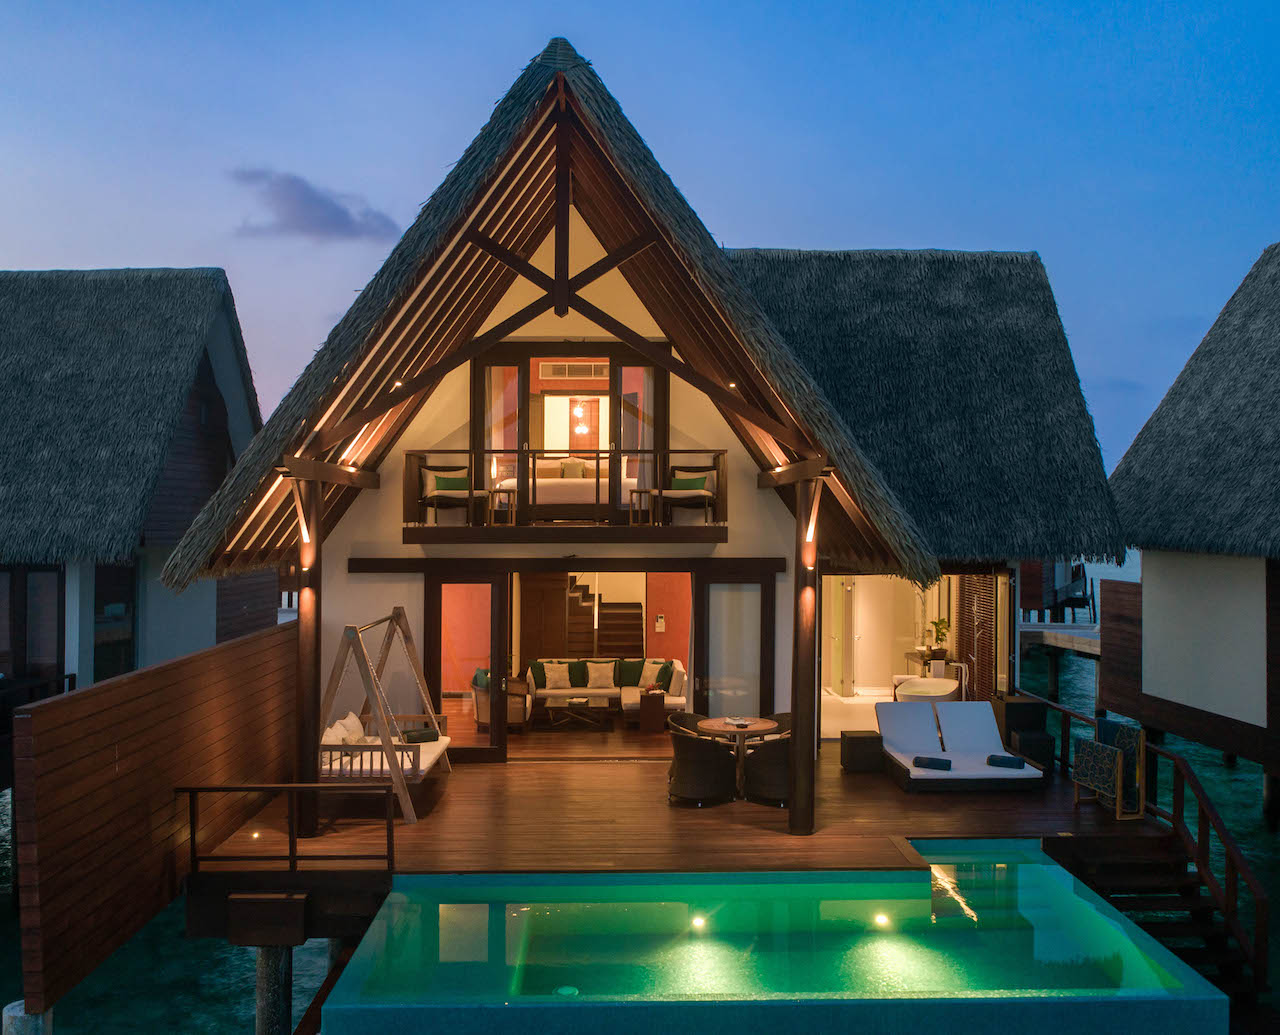 Heritance Aarah in the Maldives has unveiled its latest concept, the resort-within-a-resort Ocean Suites Wing.